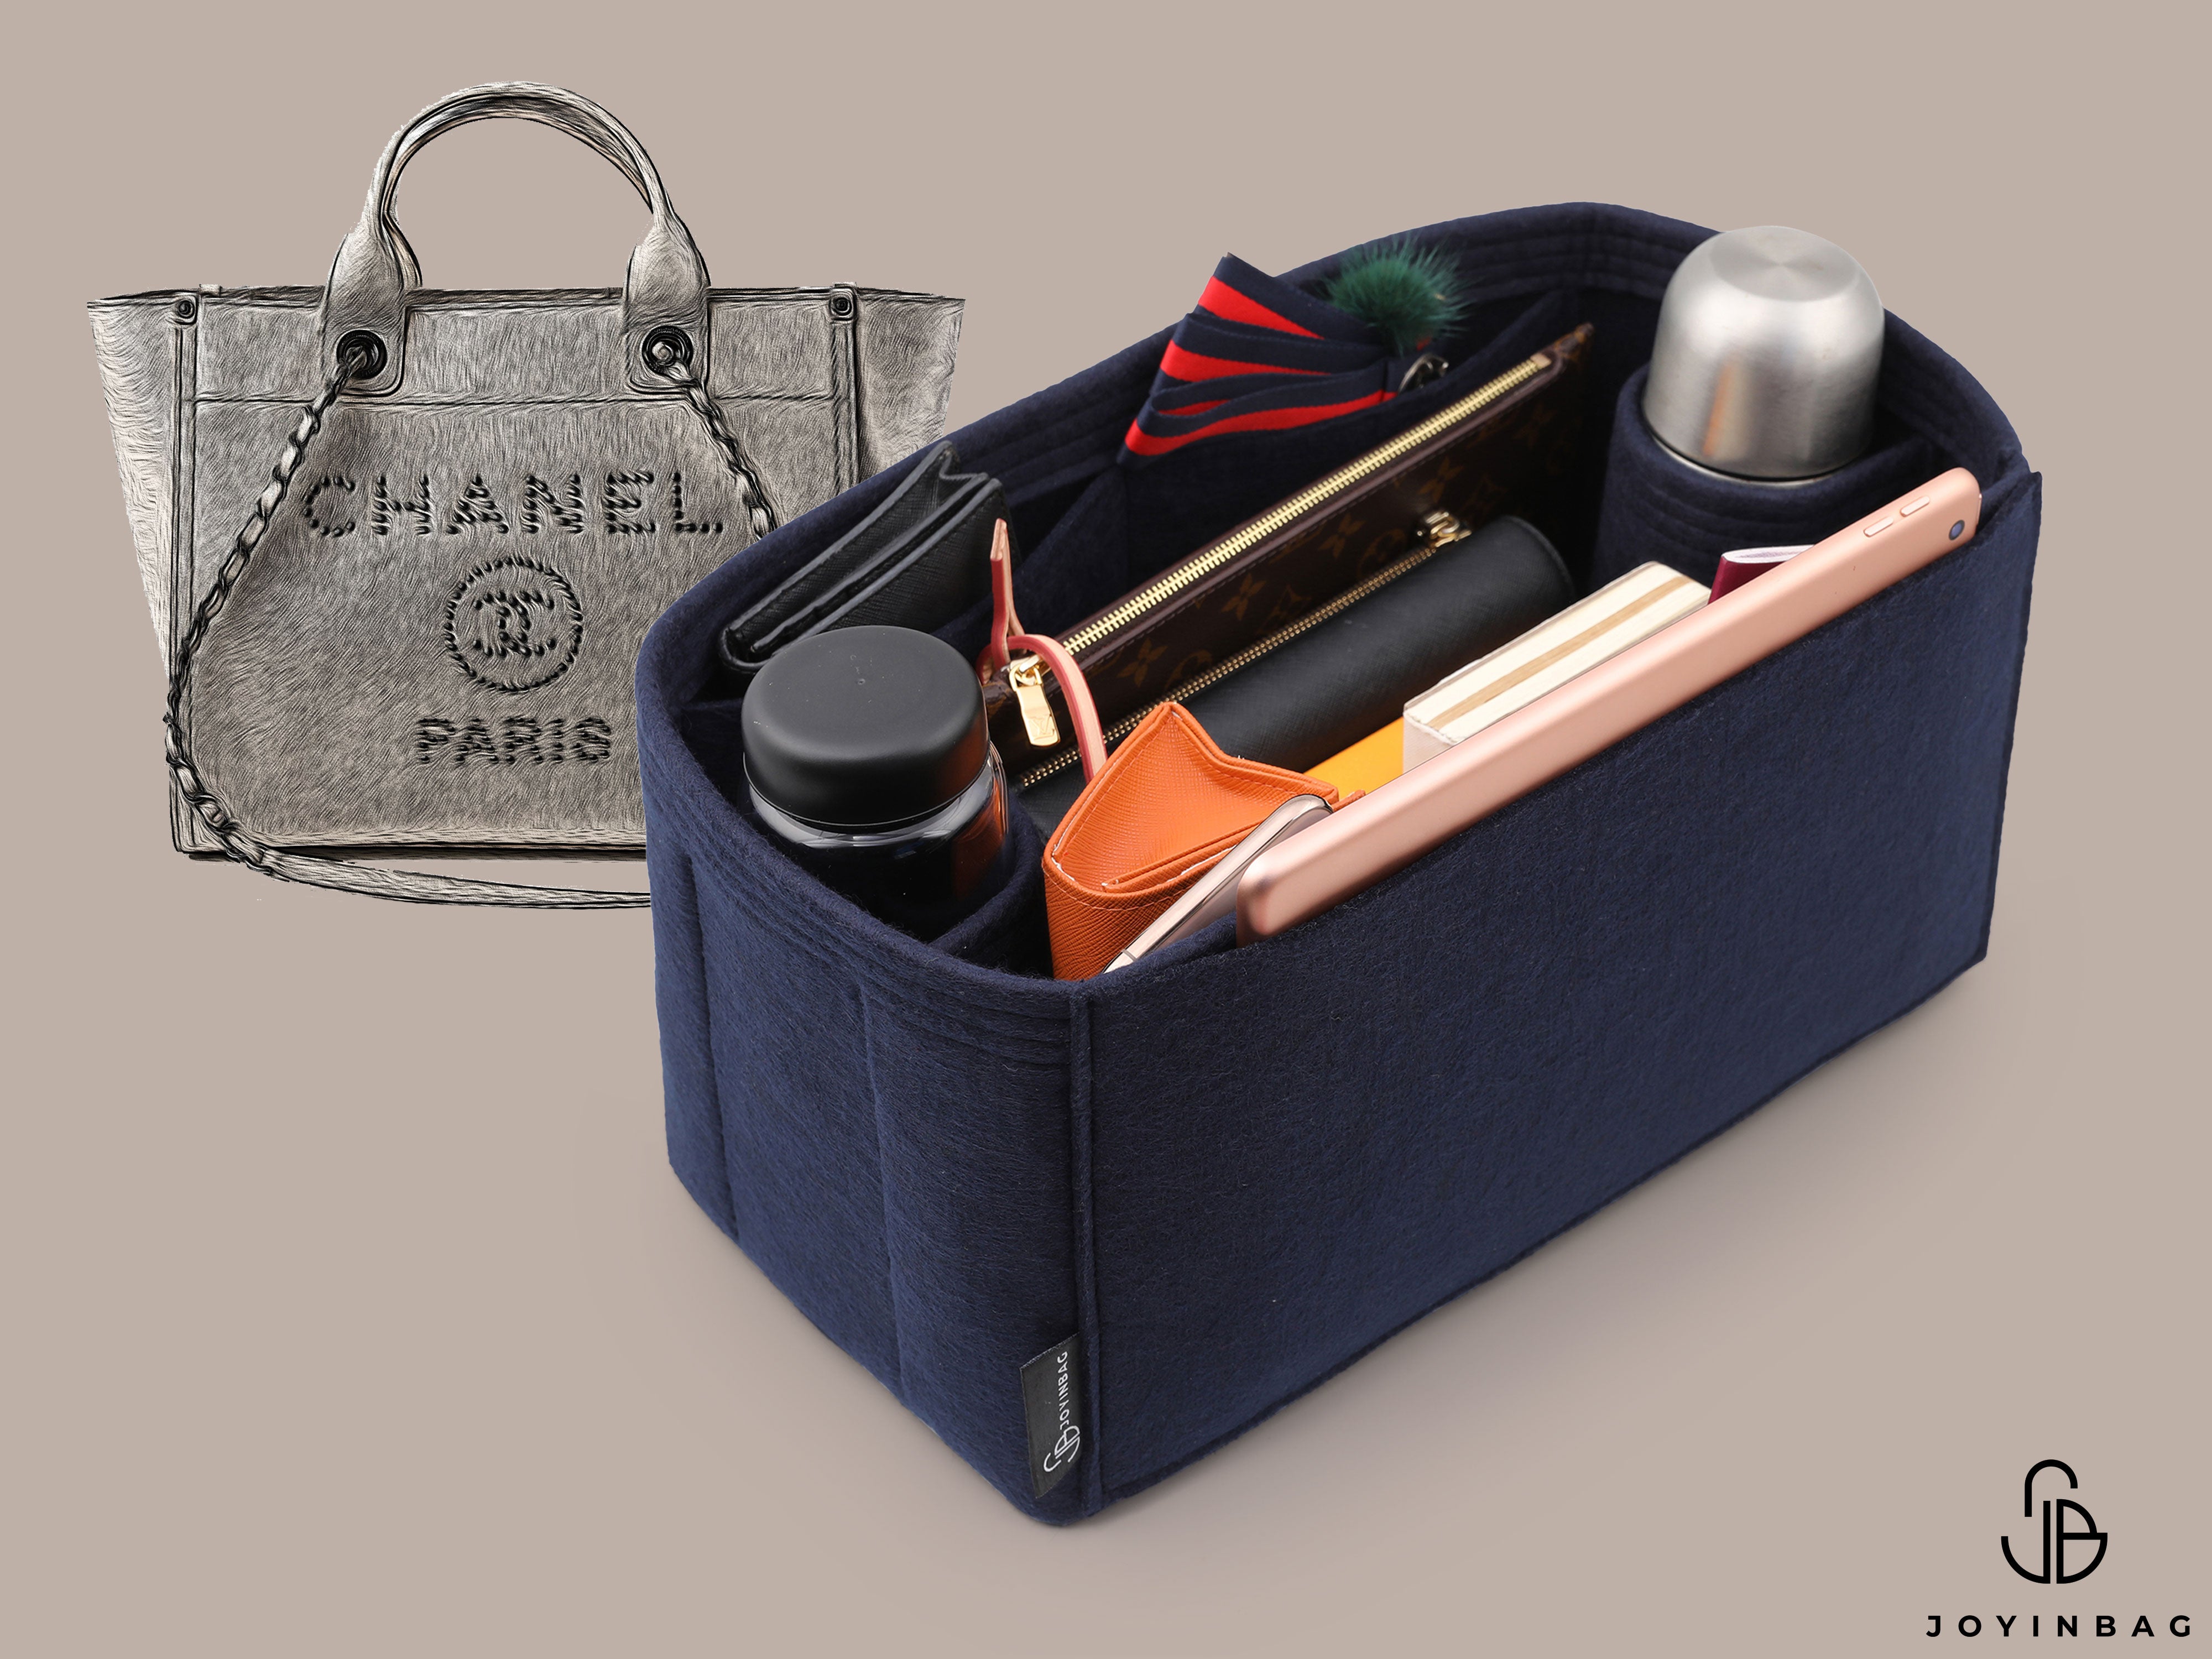 Tote Bag Organizer For Chanel Deauville Leather Small Bag with